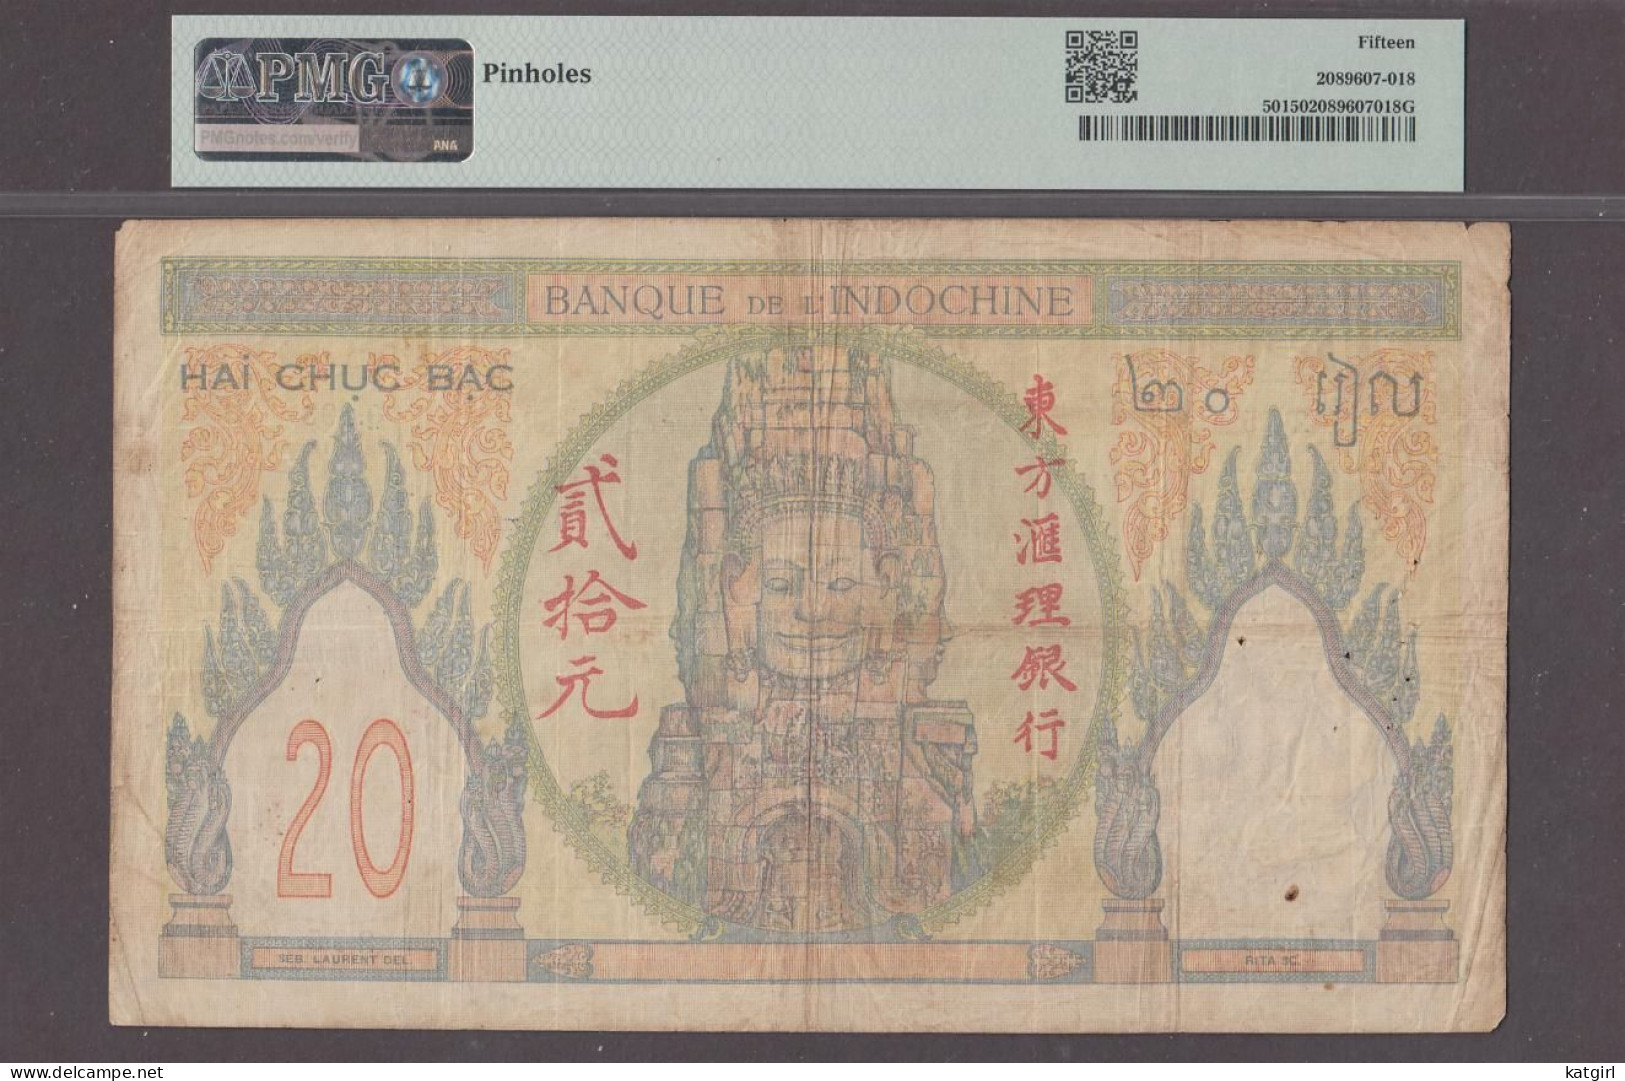 French Indo-China 20 Piastres Banknote P-50 ND(1928-31) Choice Fine PMG 15 - Indochine